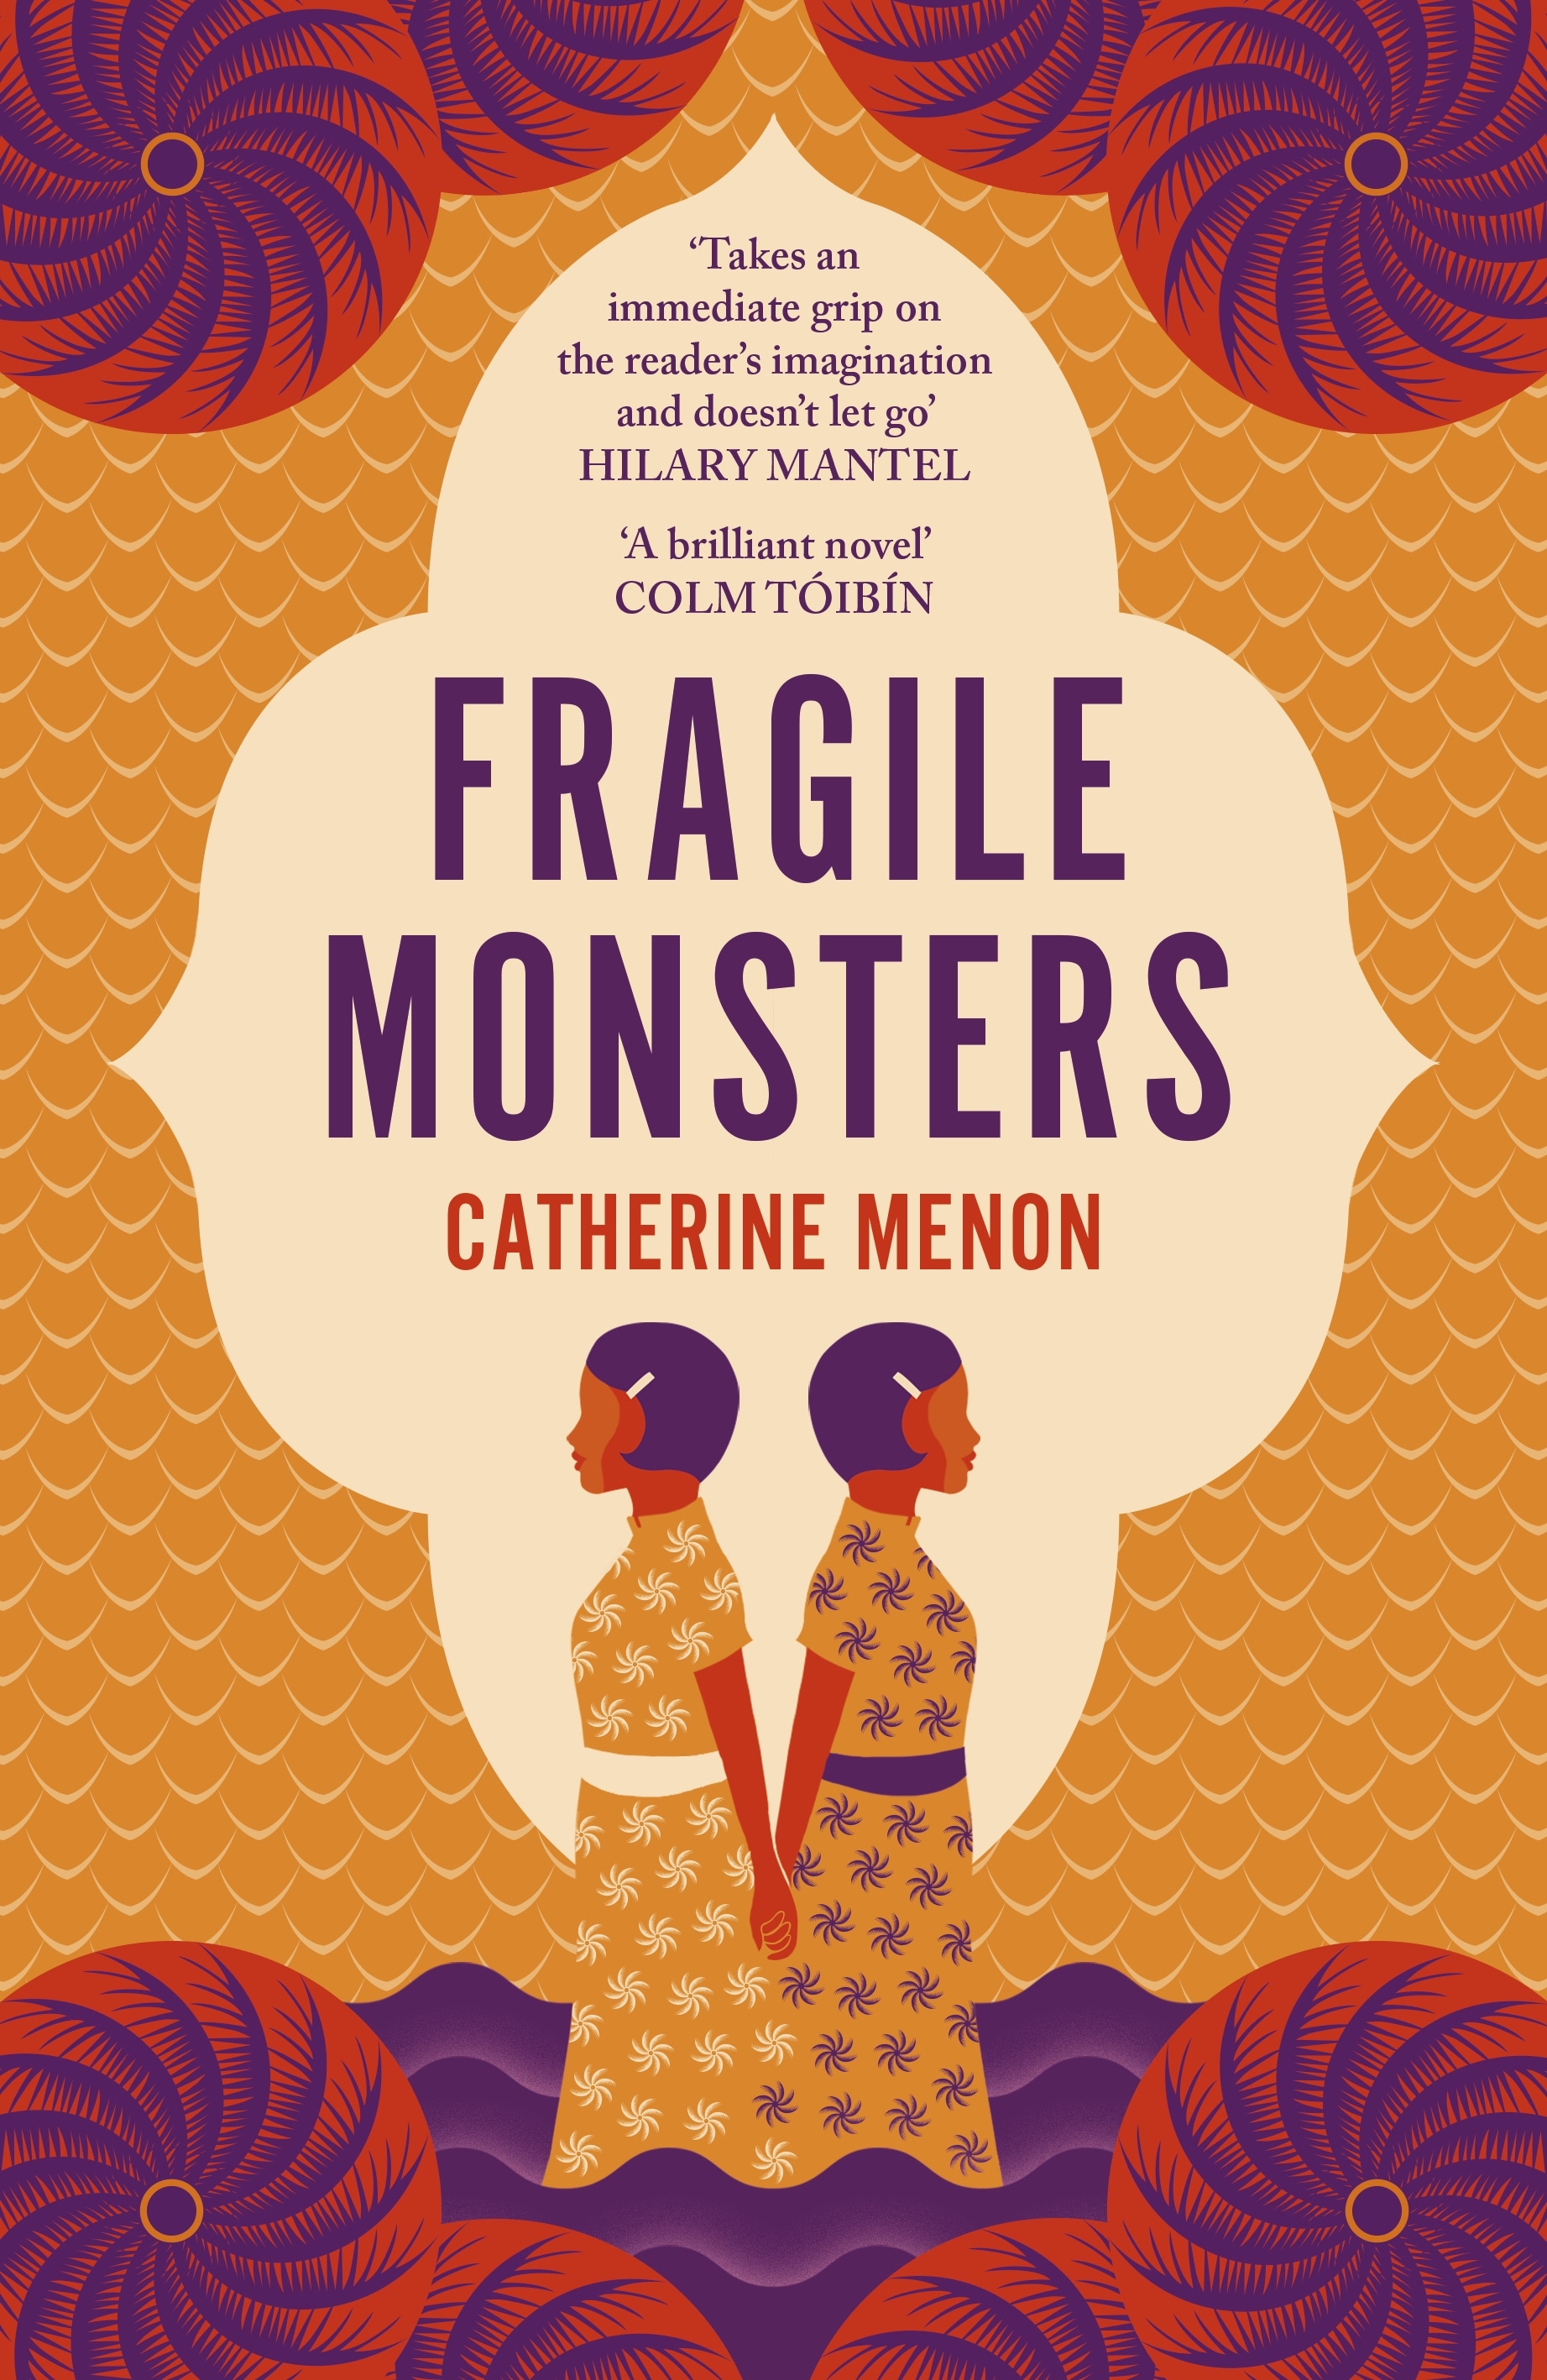 Book “Fragile Monsters” by Catherine Menon — April 8, 2021